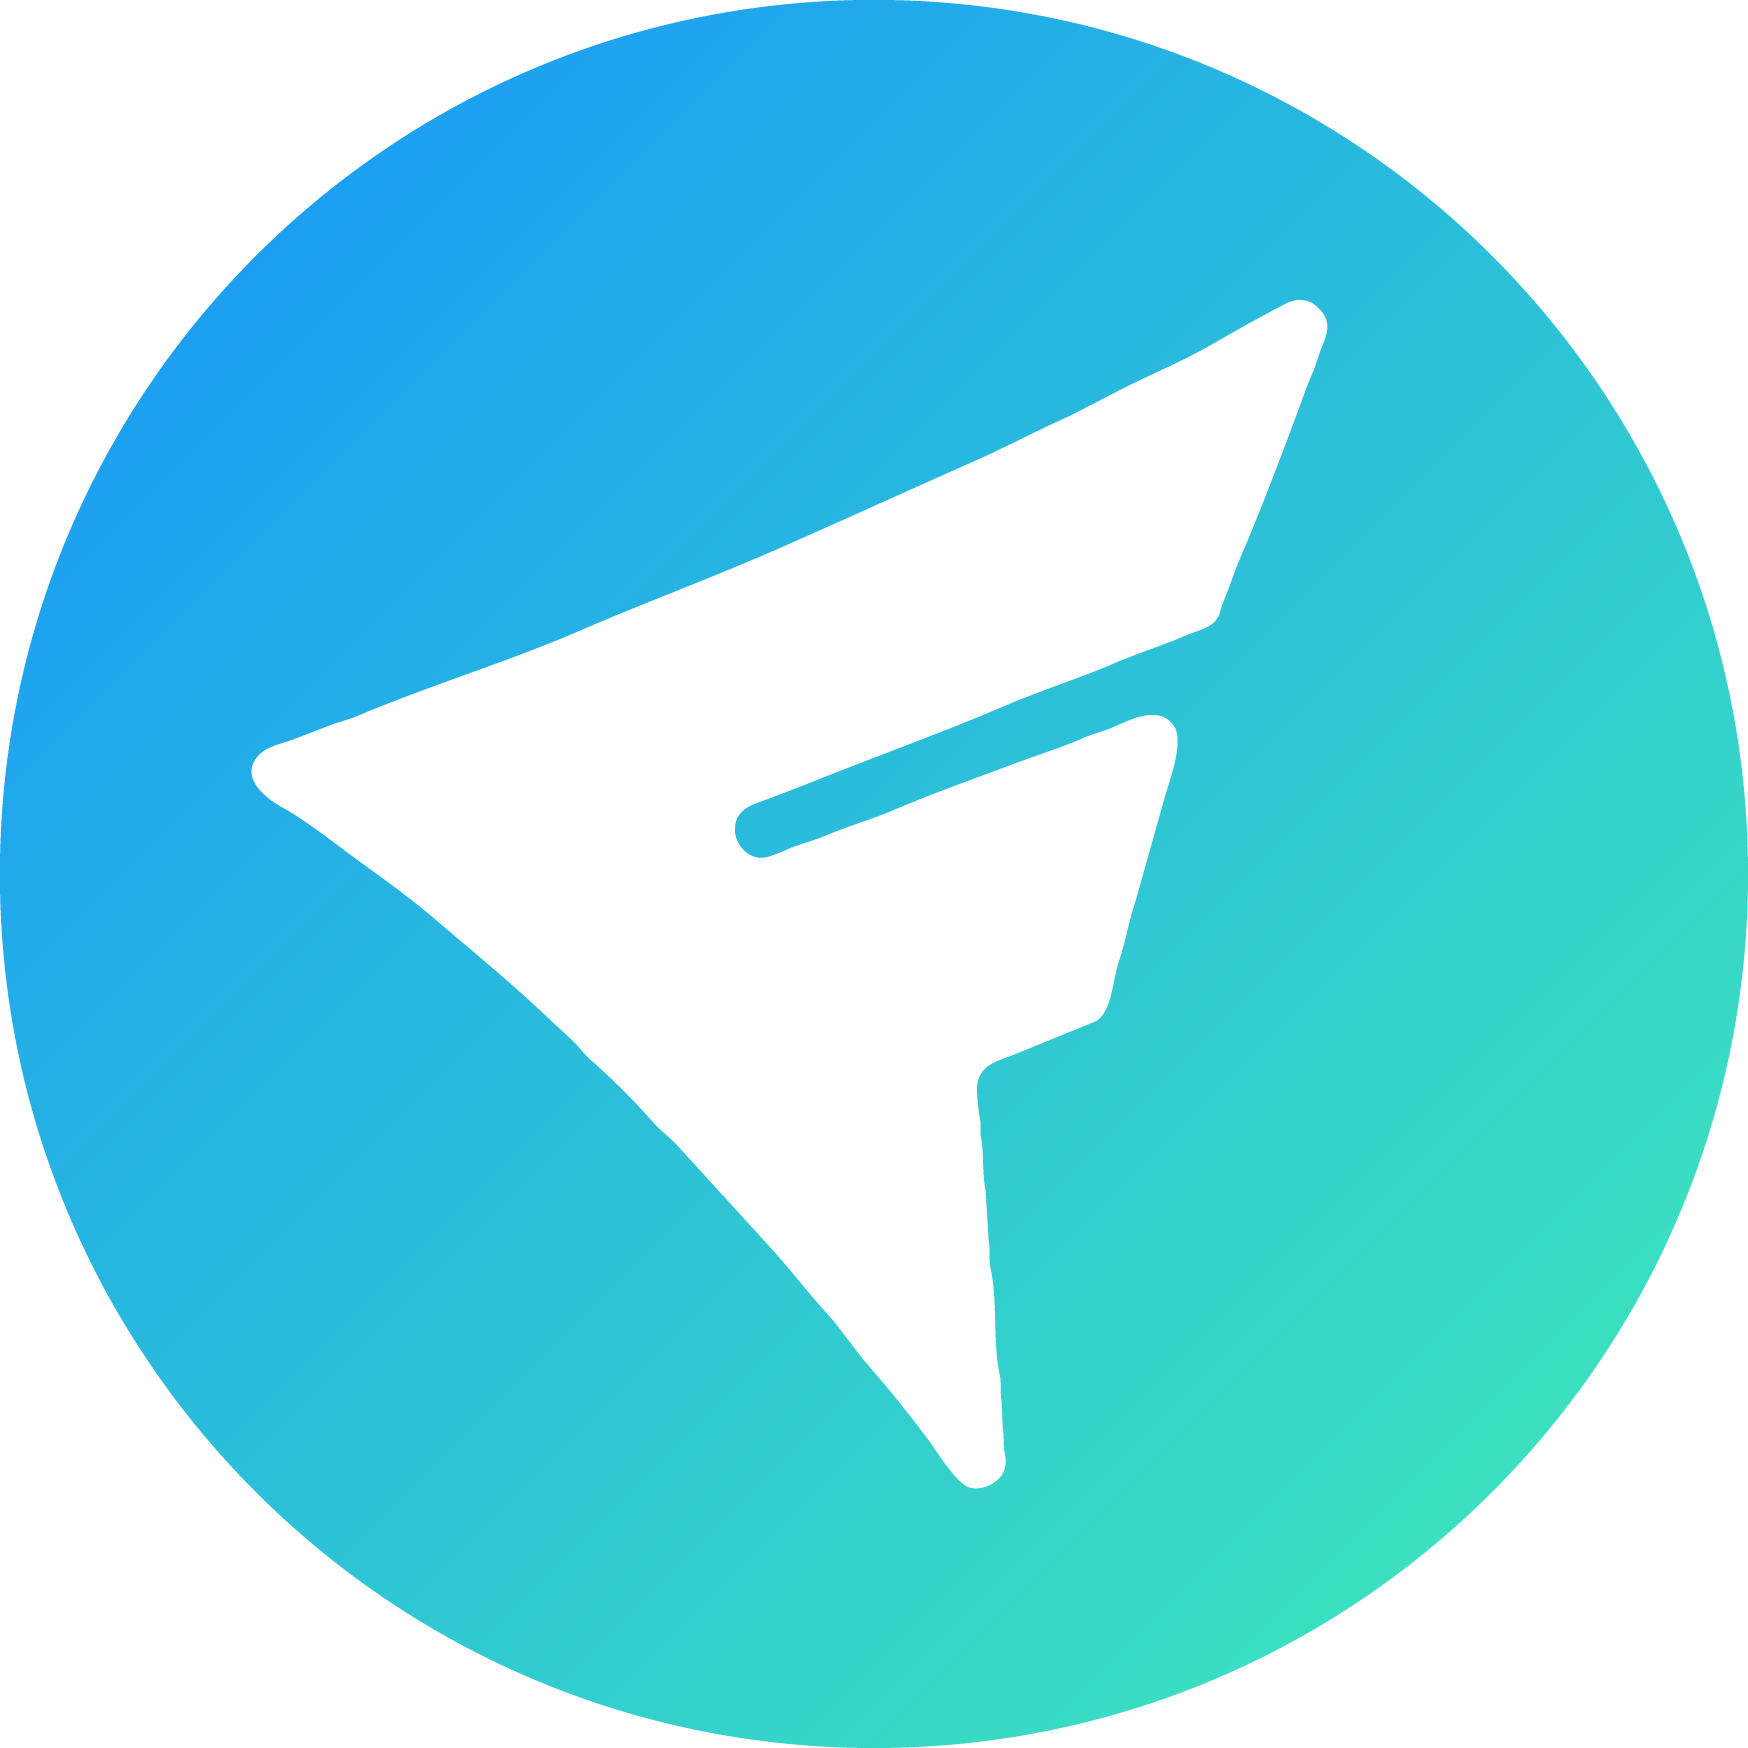 InvestFeed coin